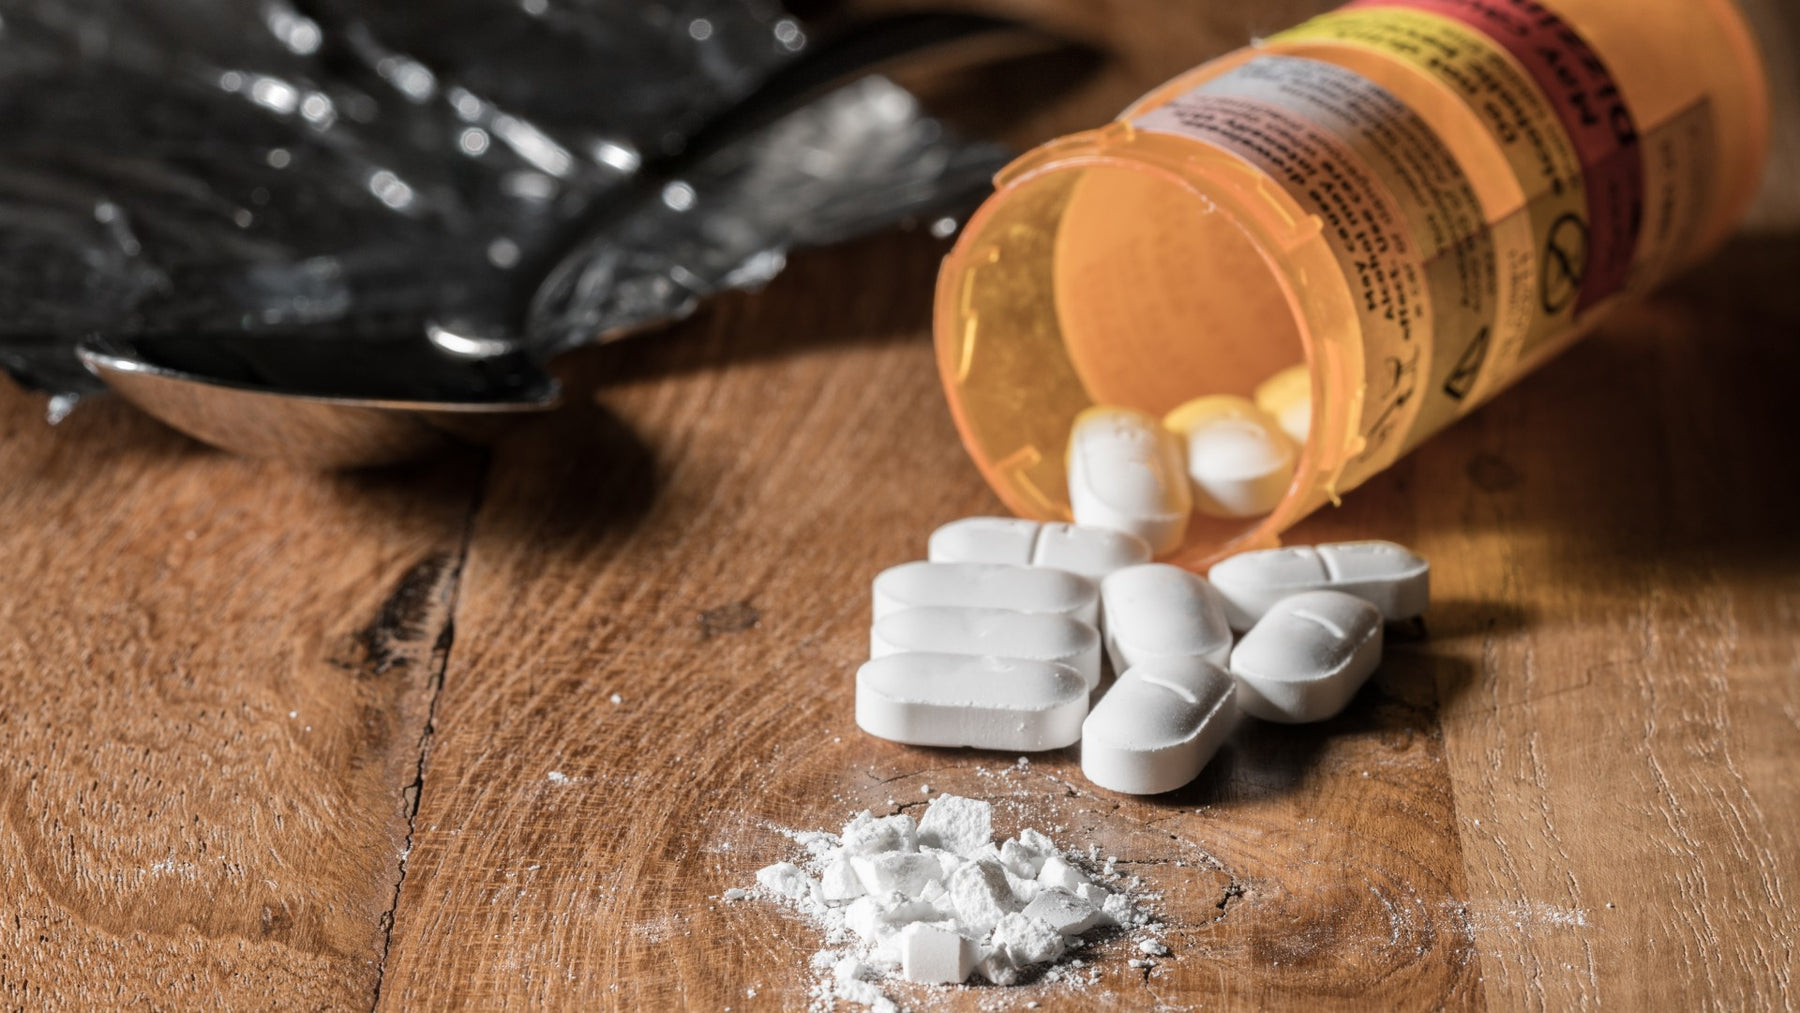 Opioid Addiction & Abuse - A Growing Epidemic